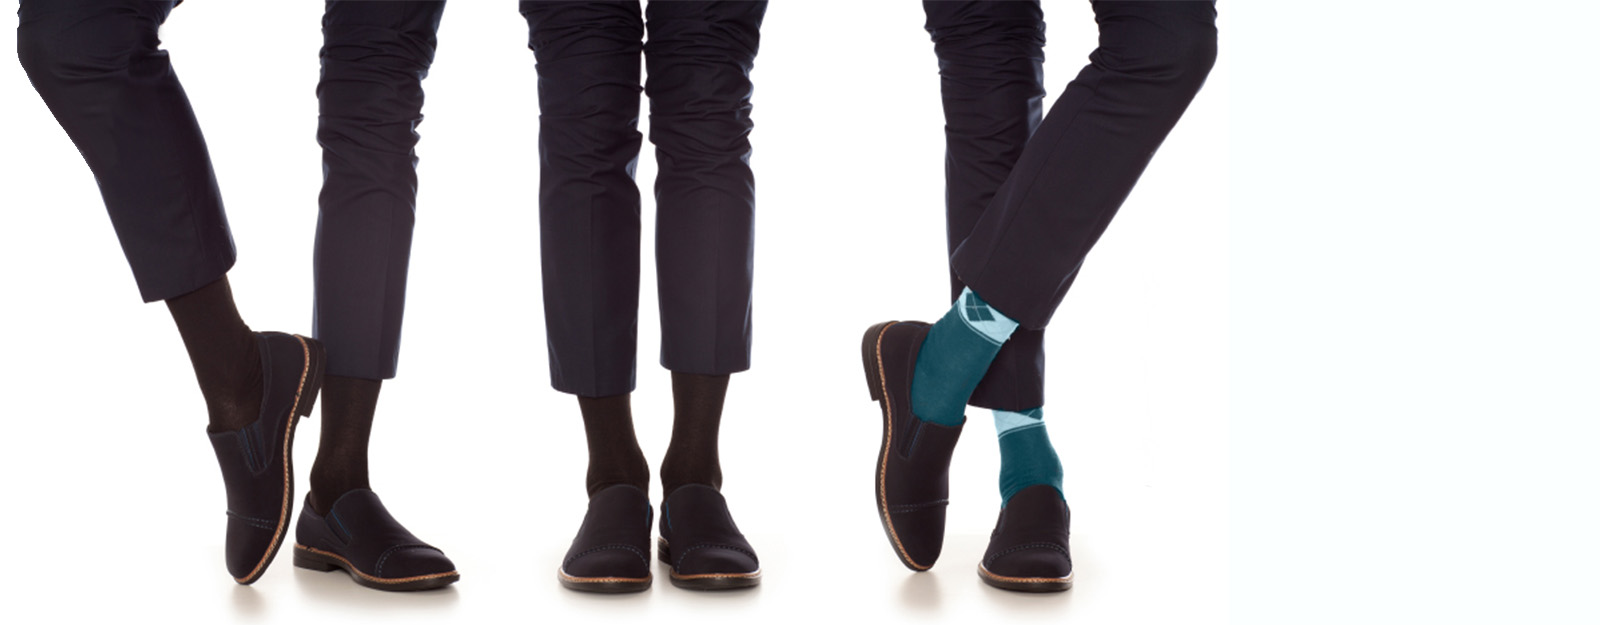 Image of three pairs of legs in matching business slacks and shoes. One set of legs has turquois colored socks.